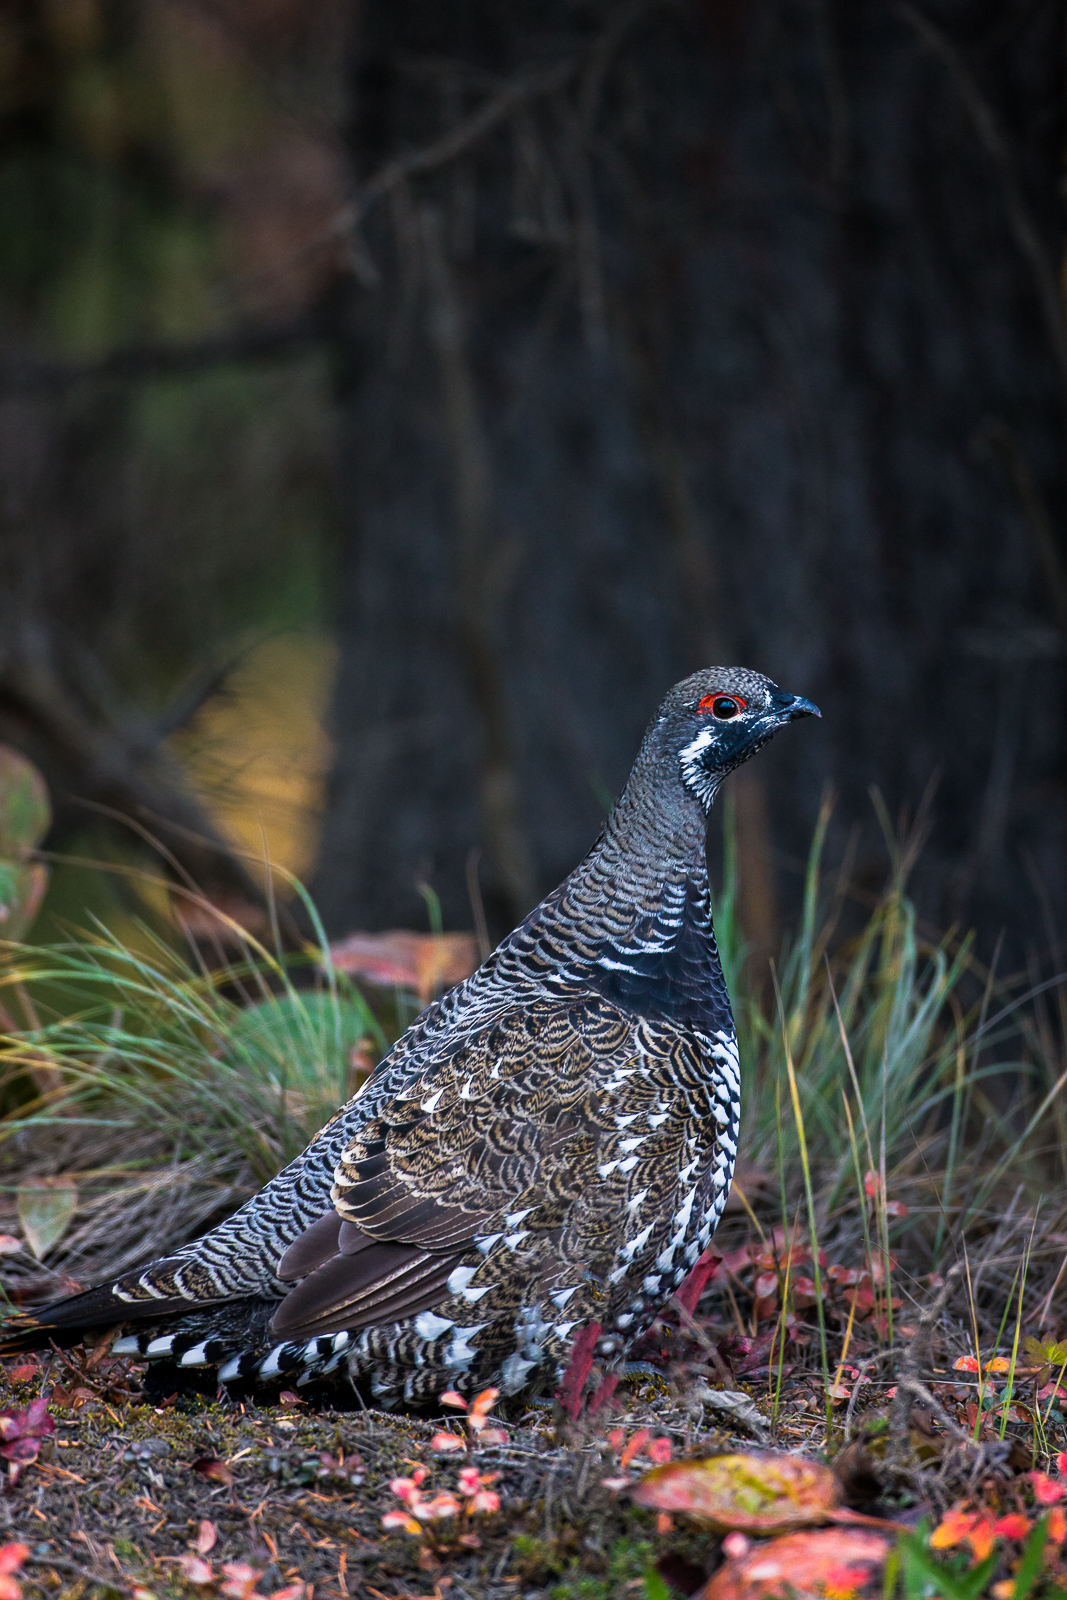 A beautiful mosaic of autumn colors highlight the Spruce Grouse's natural patterns.